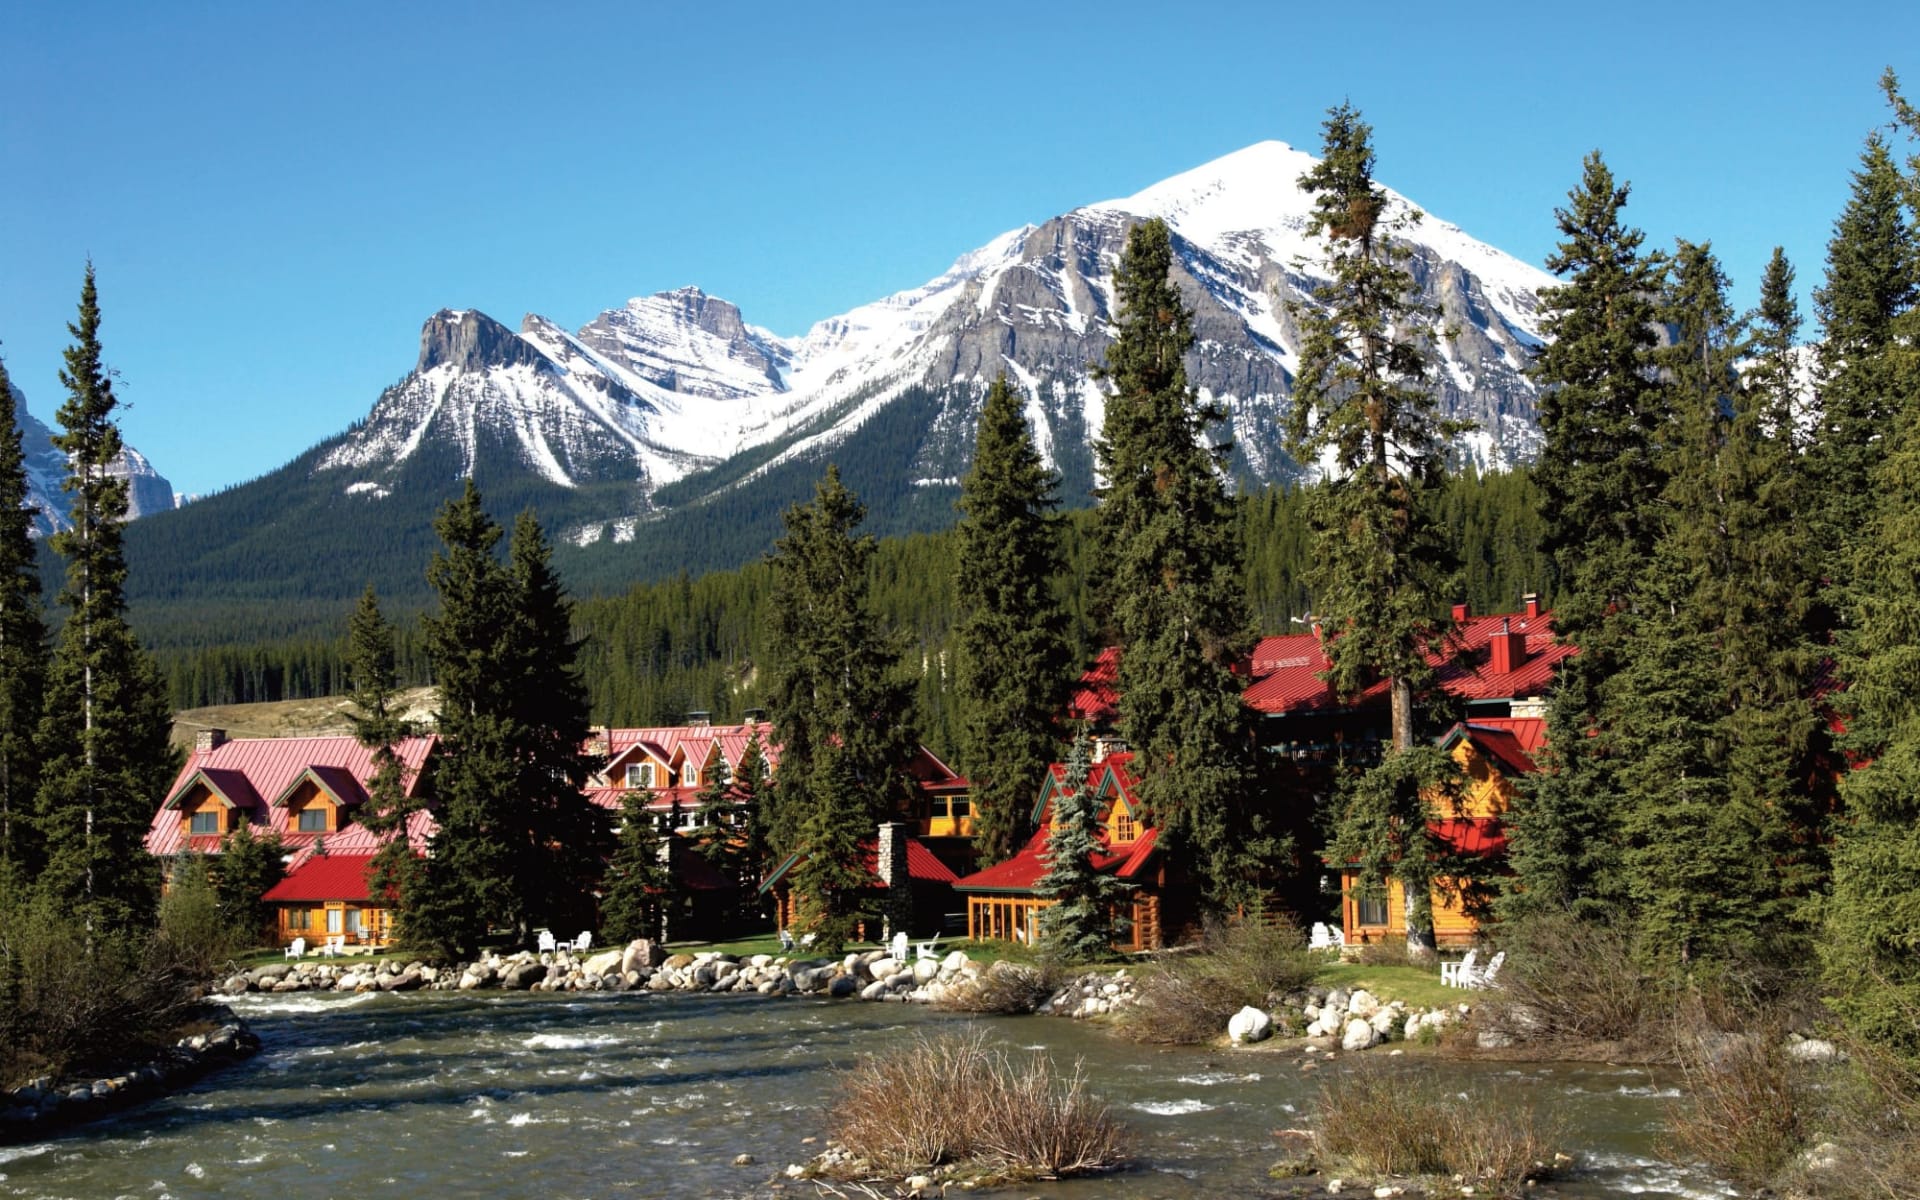 Post Hotel & Spa in Lake Louise:  Post Hotel & Spa_ExteriorWithPipestoneRiver